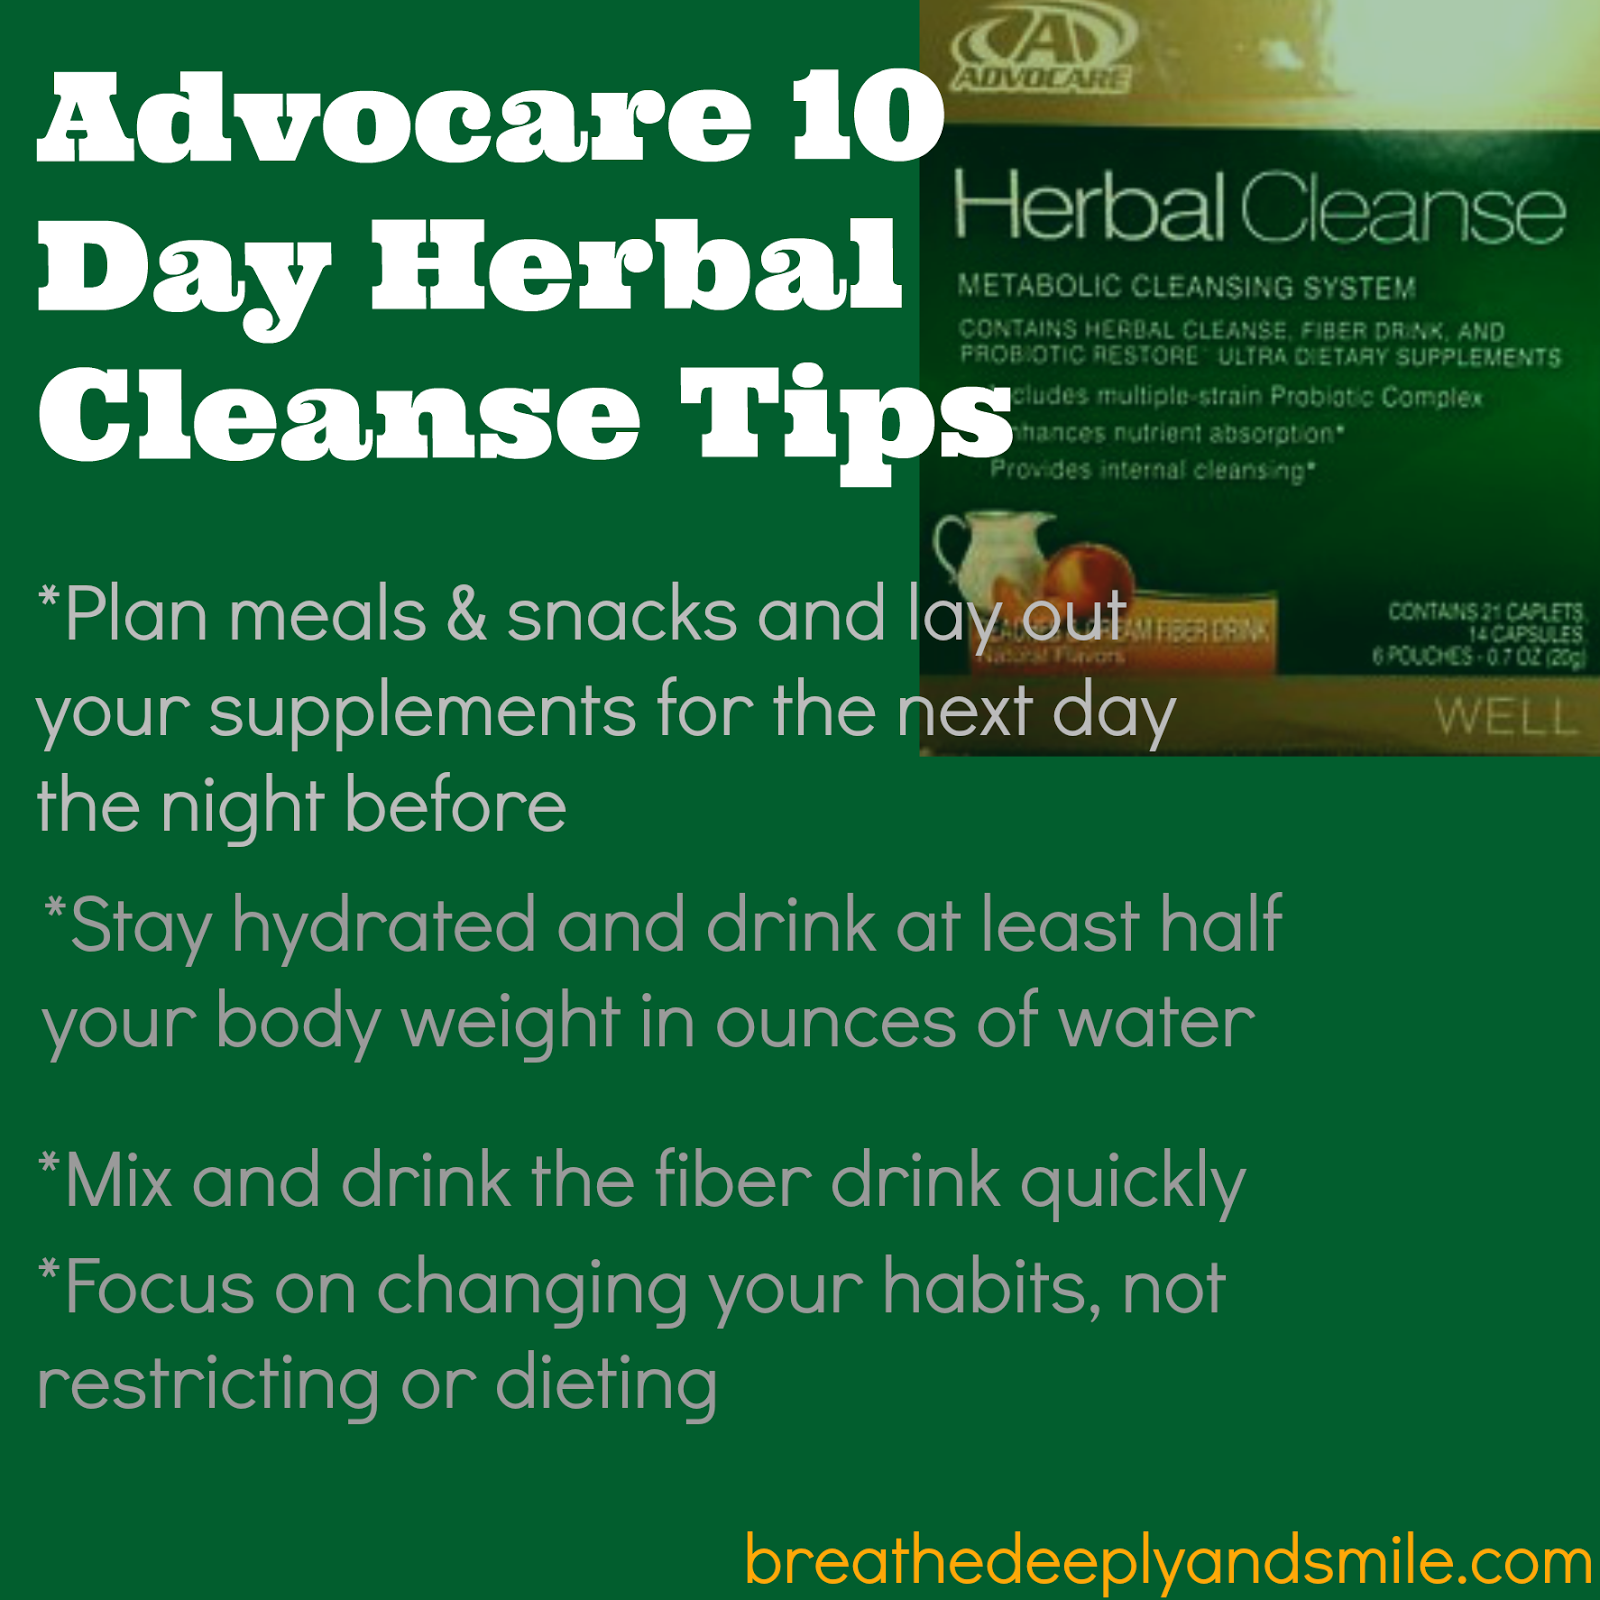 Advocare Herbal Cleanse Review Advo 24